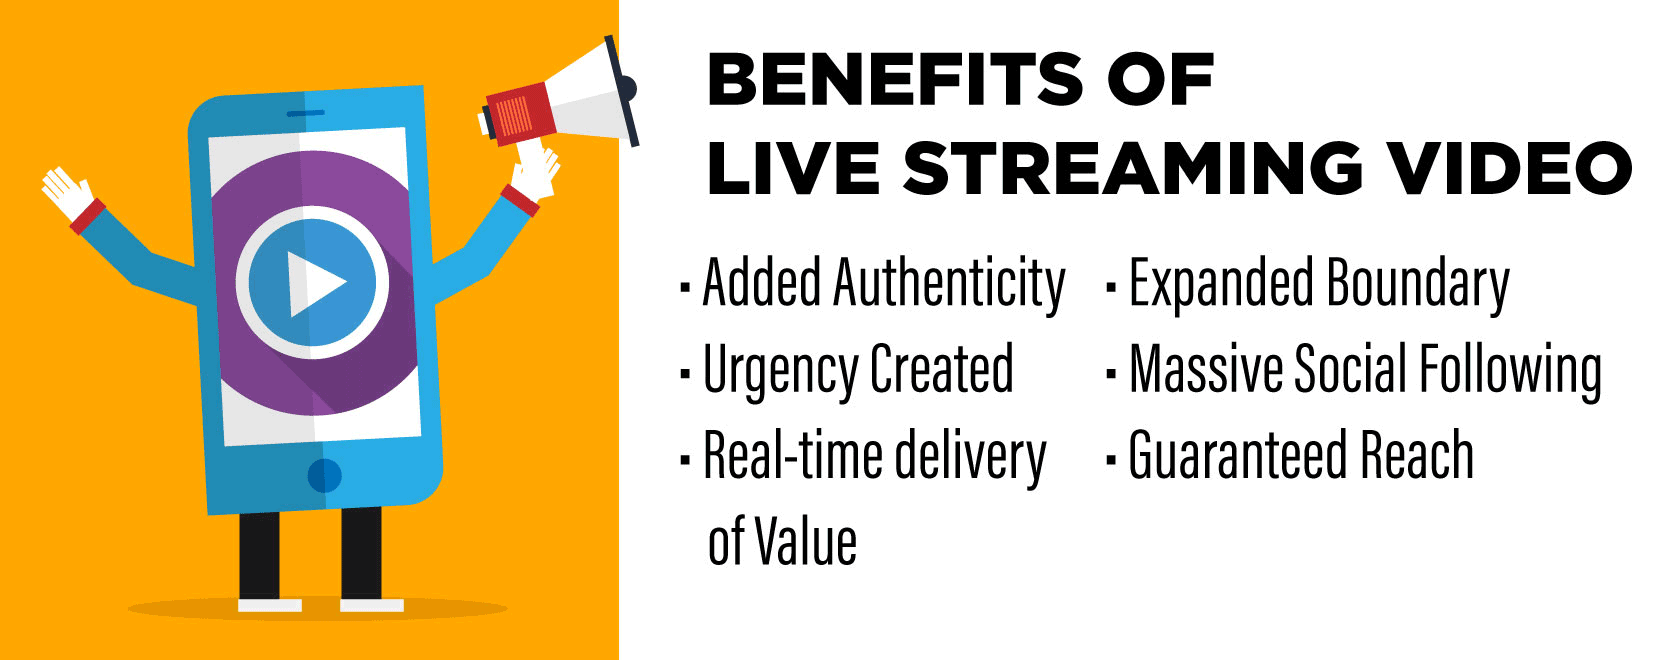 Benefits of Live Streaming Video